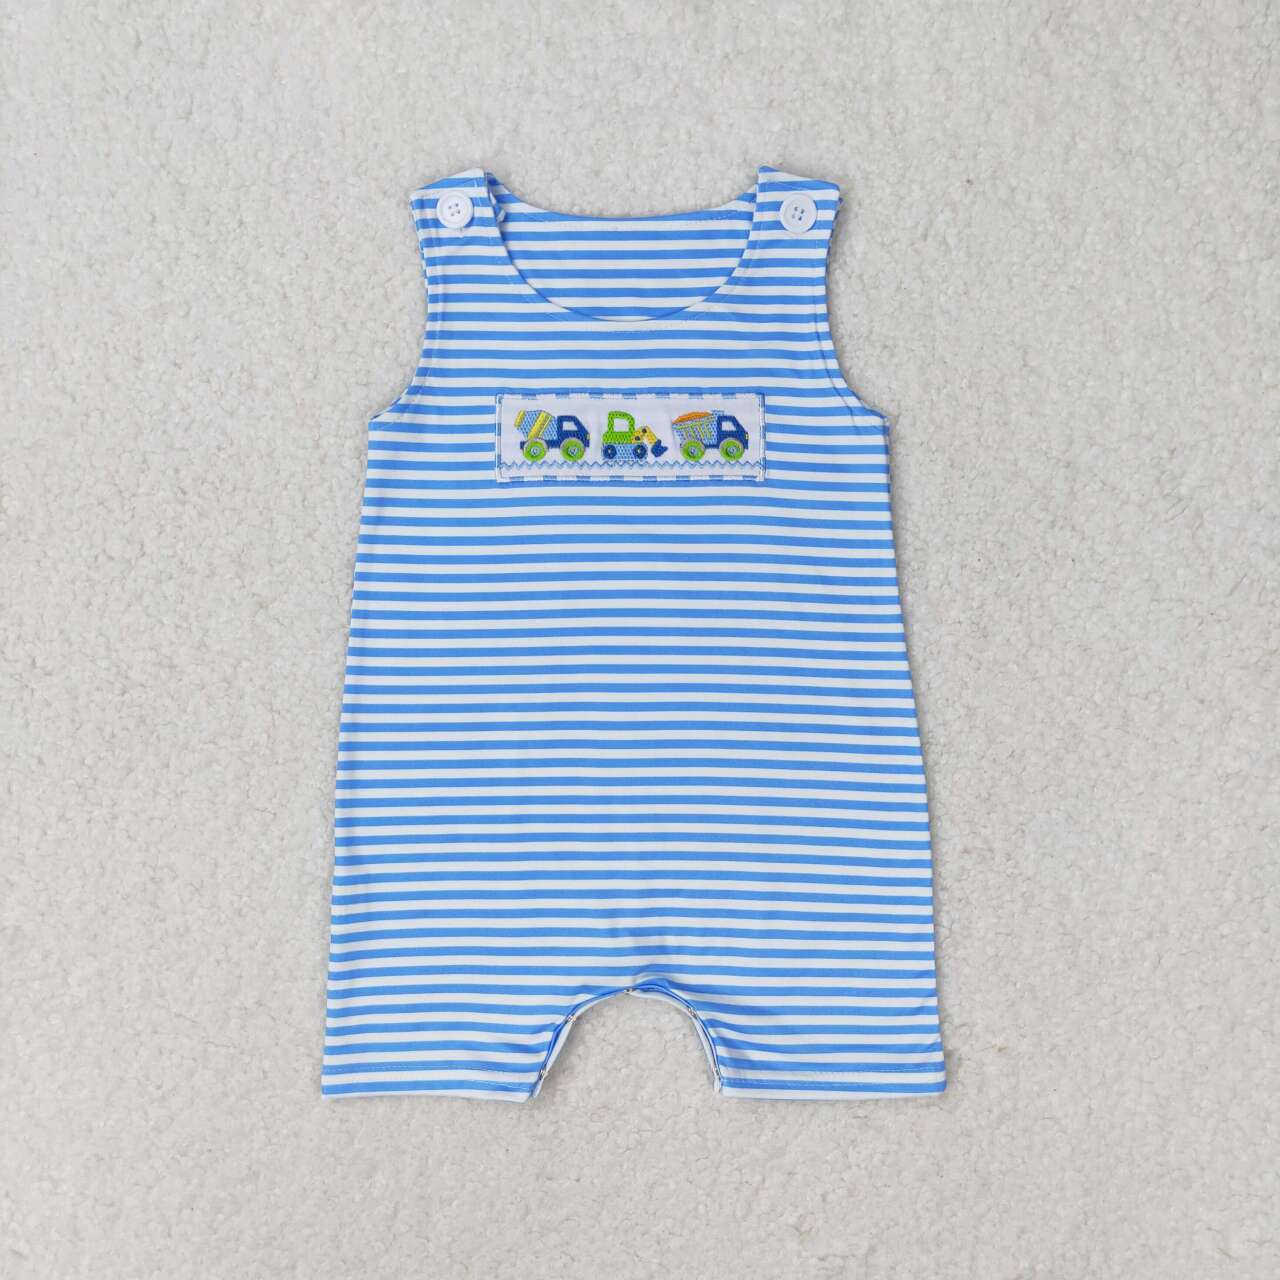 baby boy stripes embroideryconstructions romper